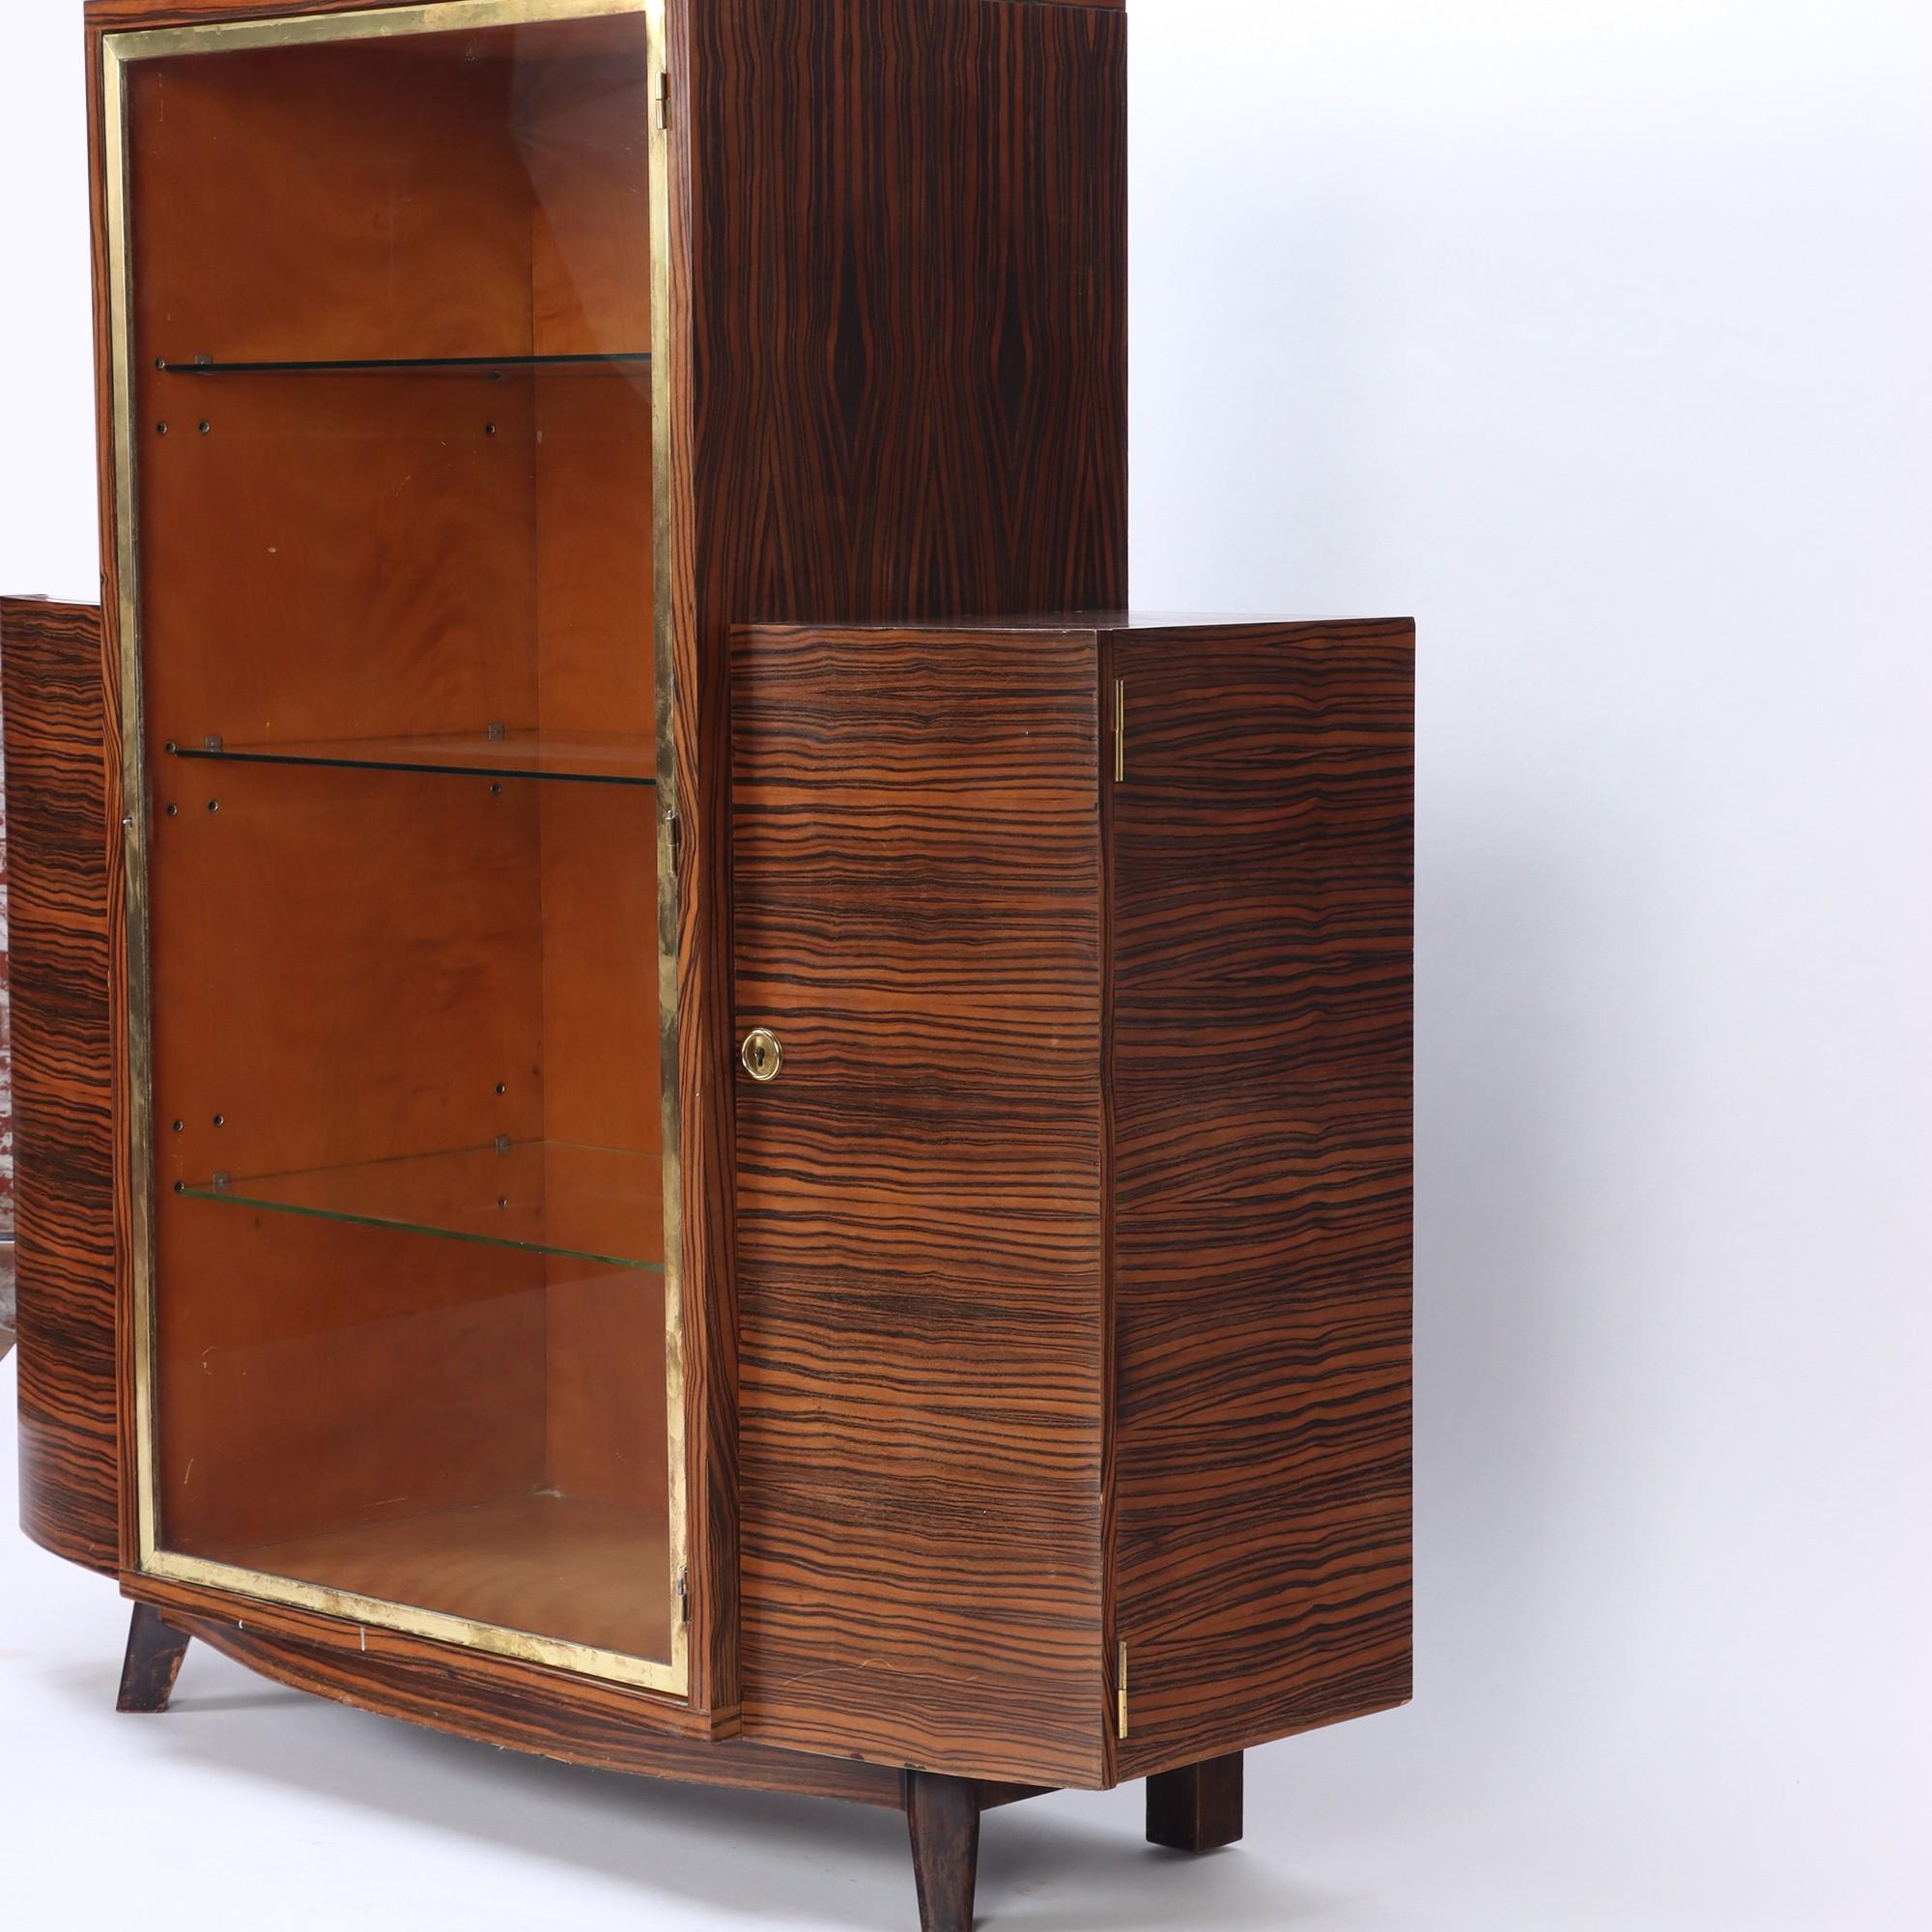 French Art Deco Macassar Bar Cabinet or Vitrine, C 1935 In Good Condition For Sale In Philadelphia, PA